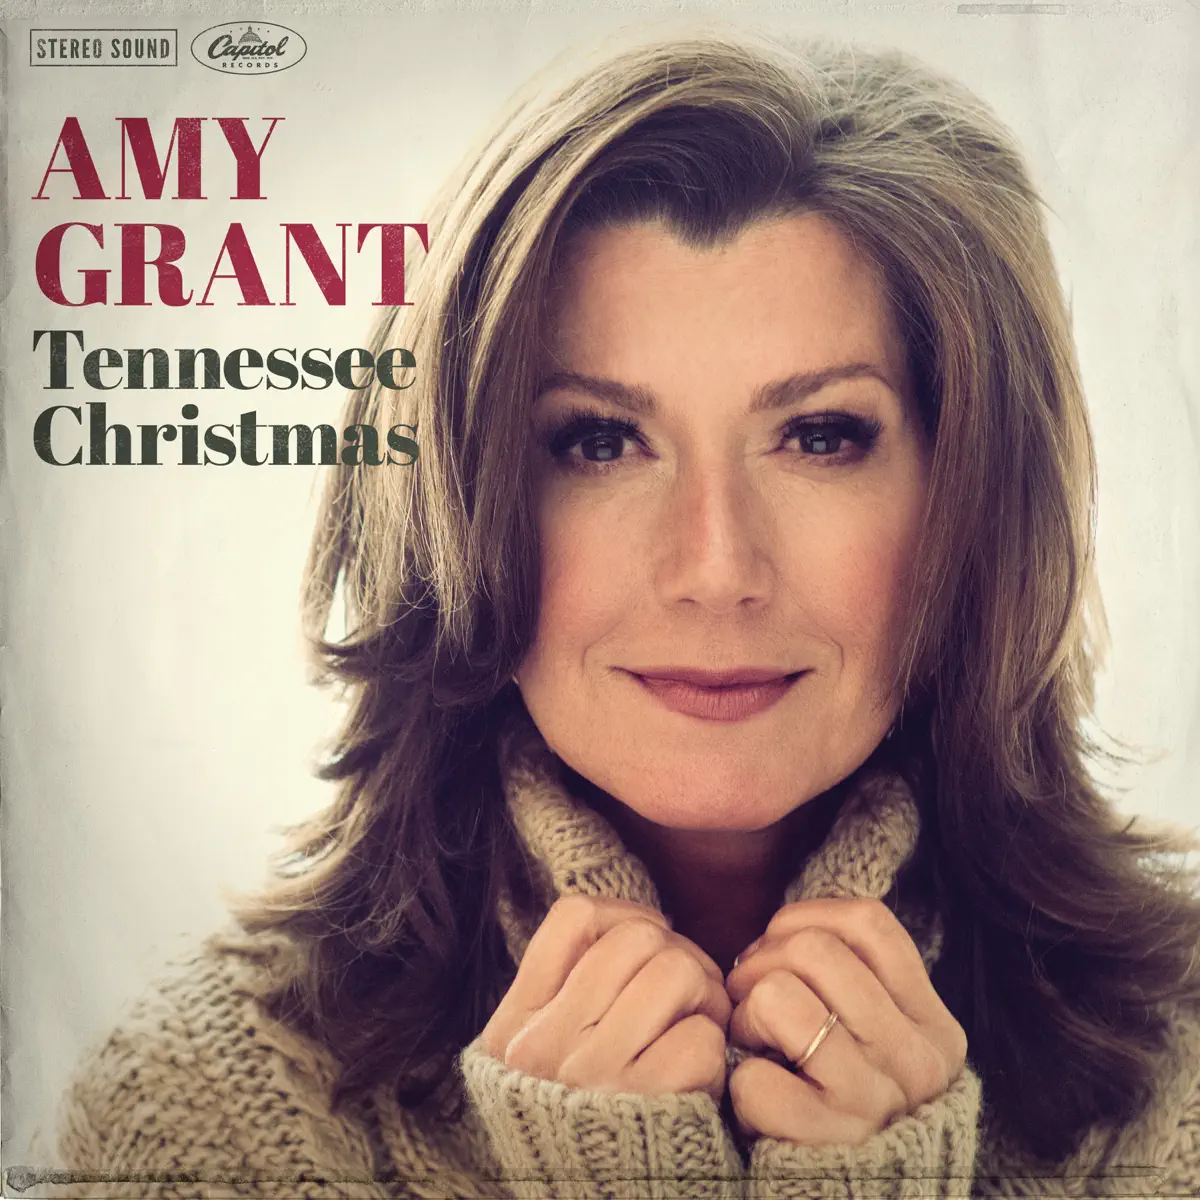 Amy Grant - Tennessee Christmas (2016) [iTunes Plus AAC M4A]-新房子